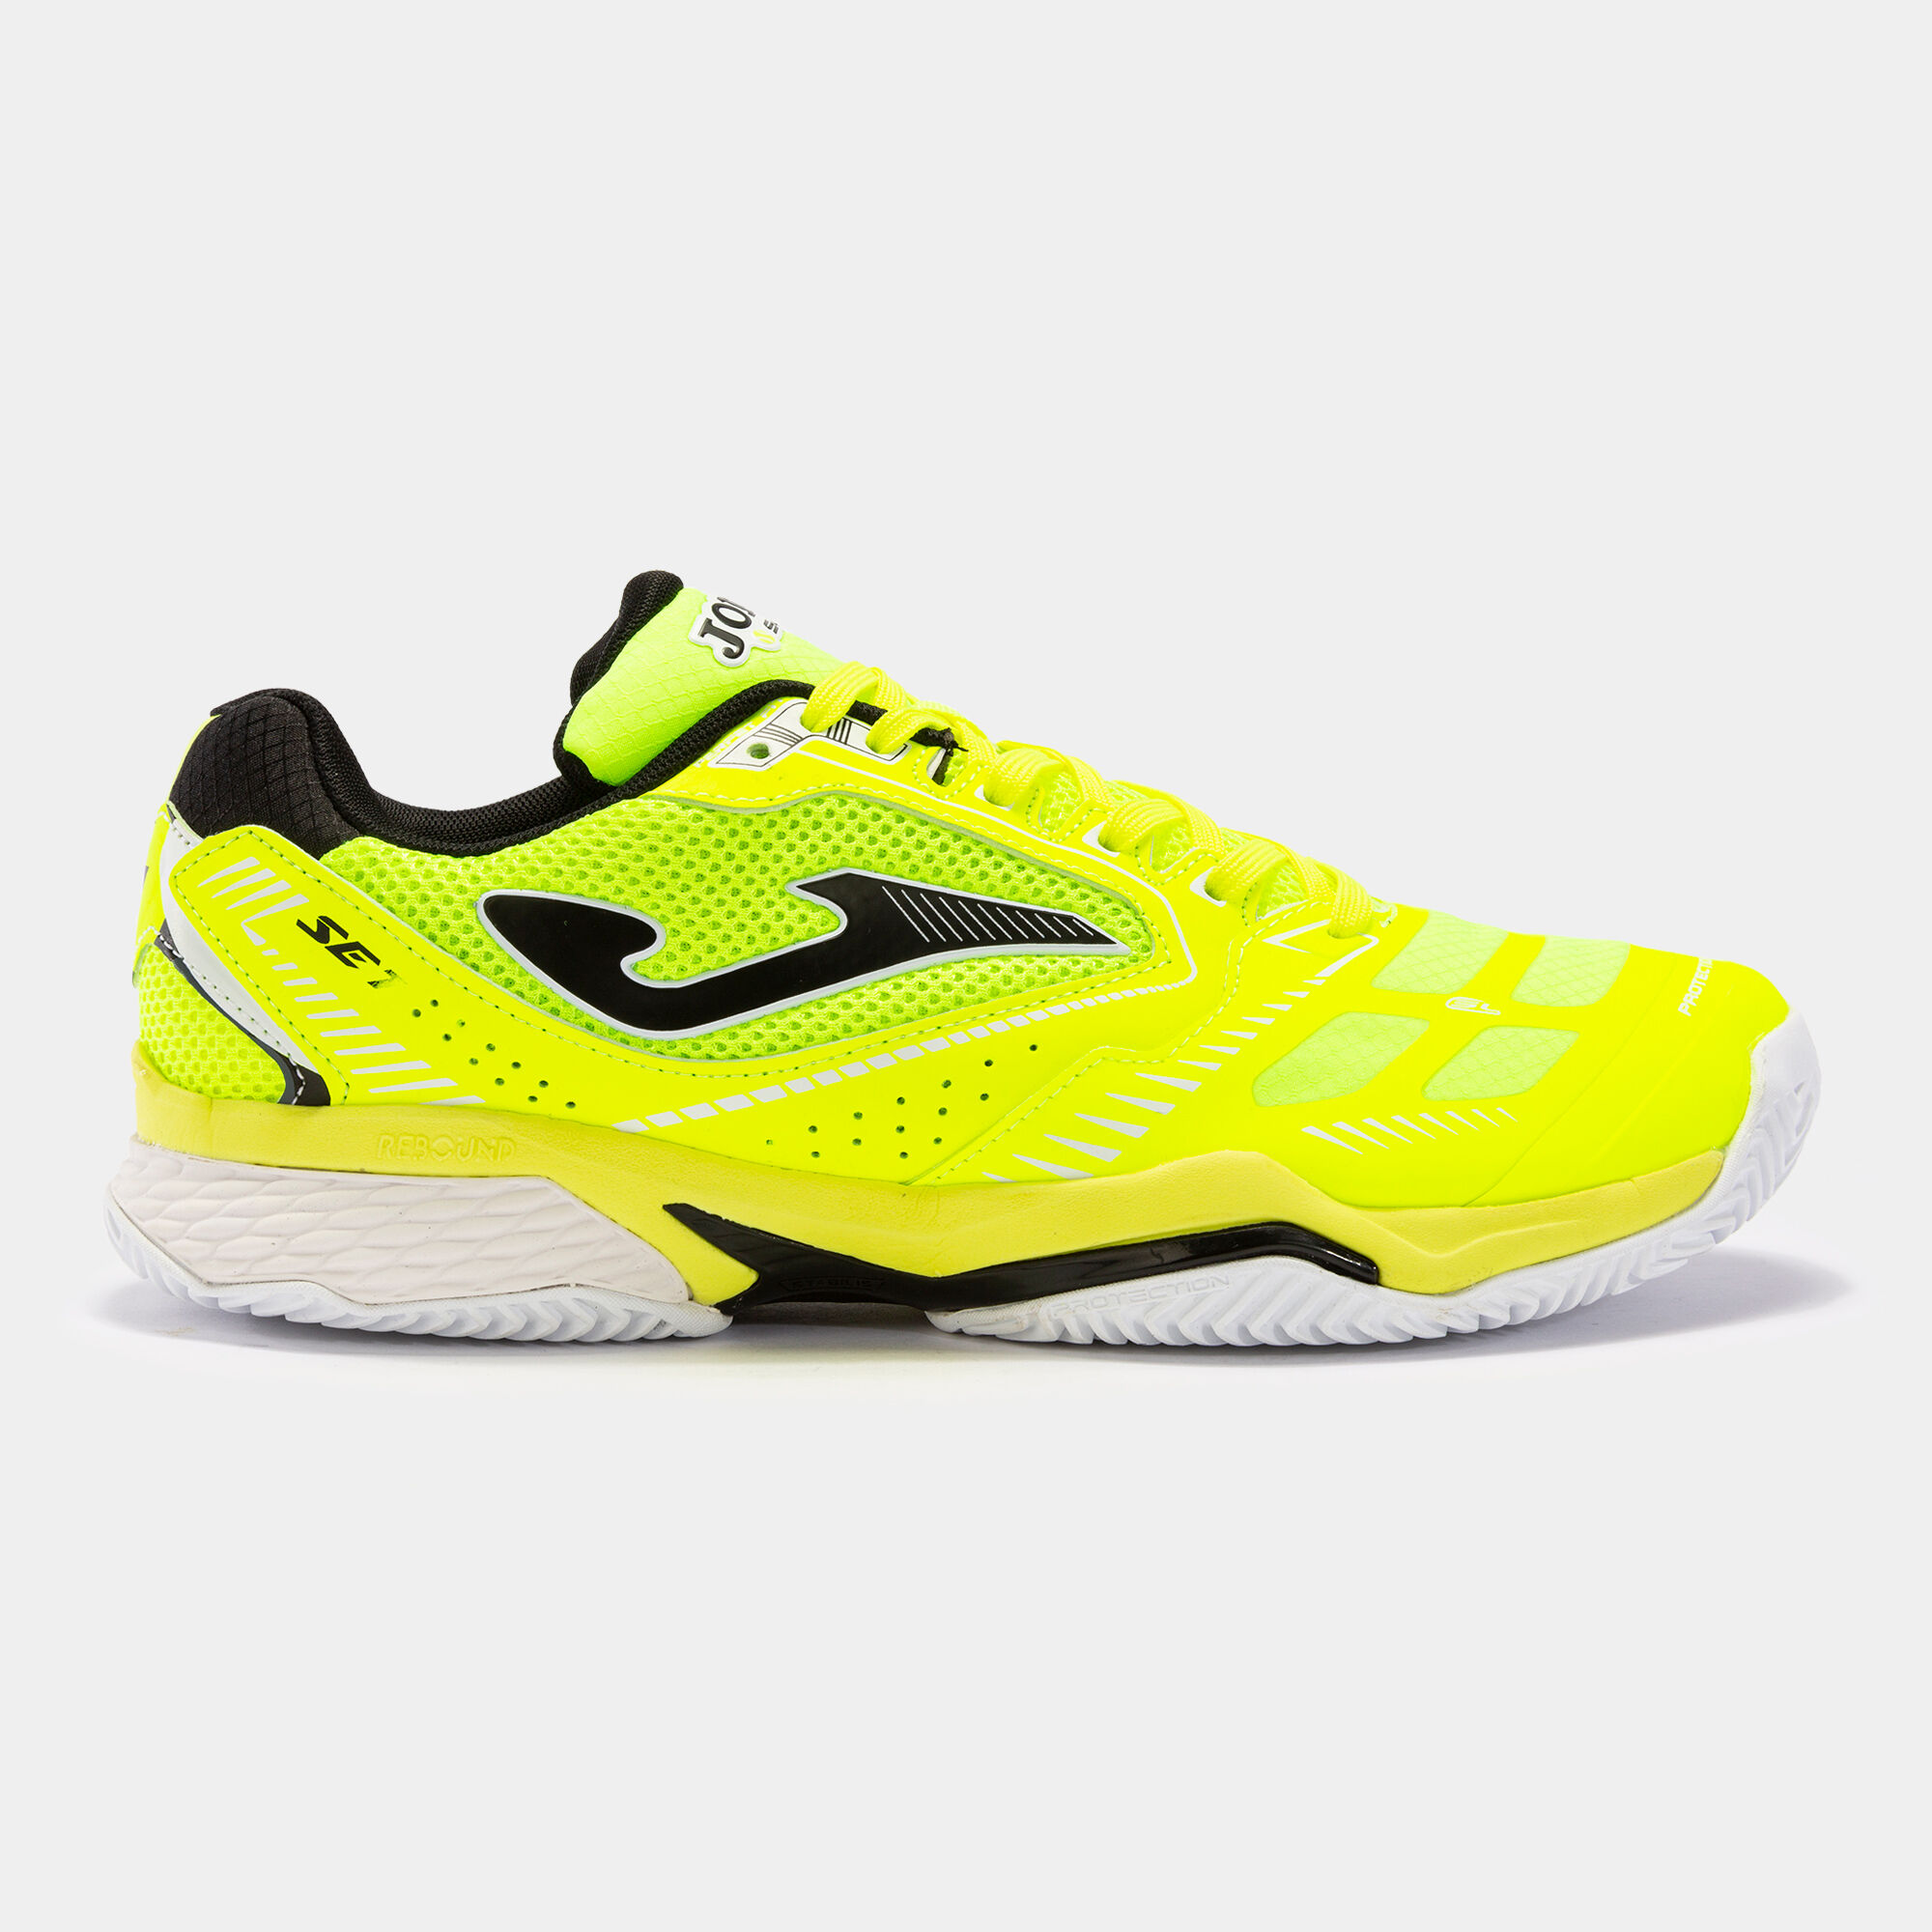 SHOES SET 21 CLAY MAN FLUORESCENT YELLOW BLACK